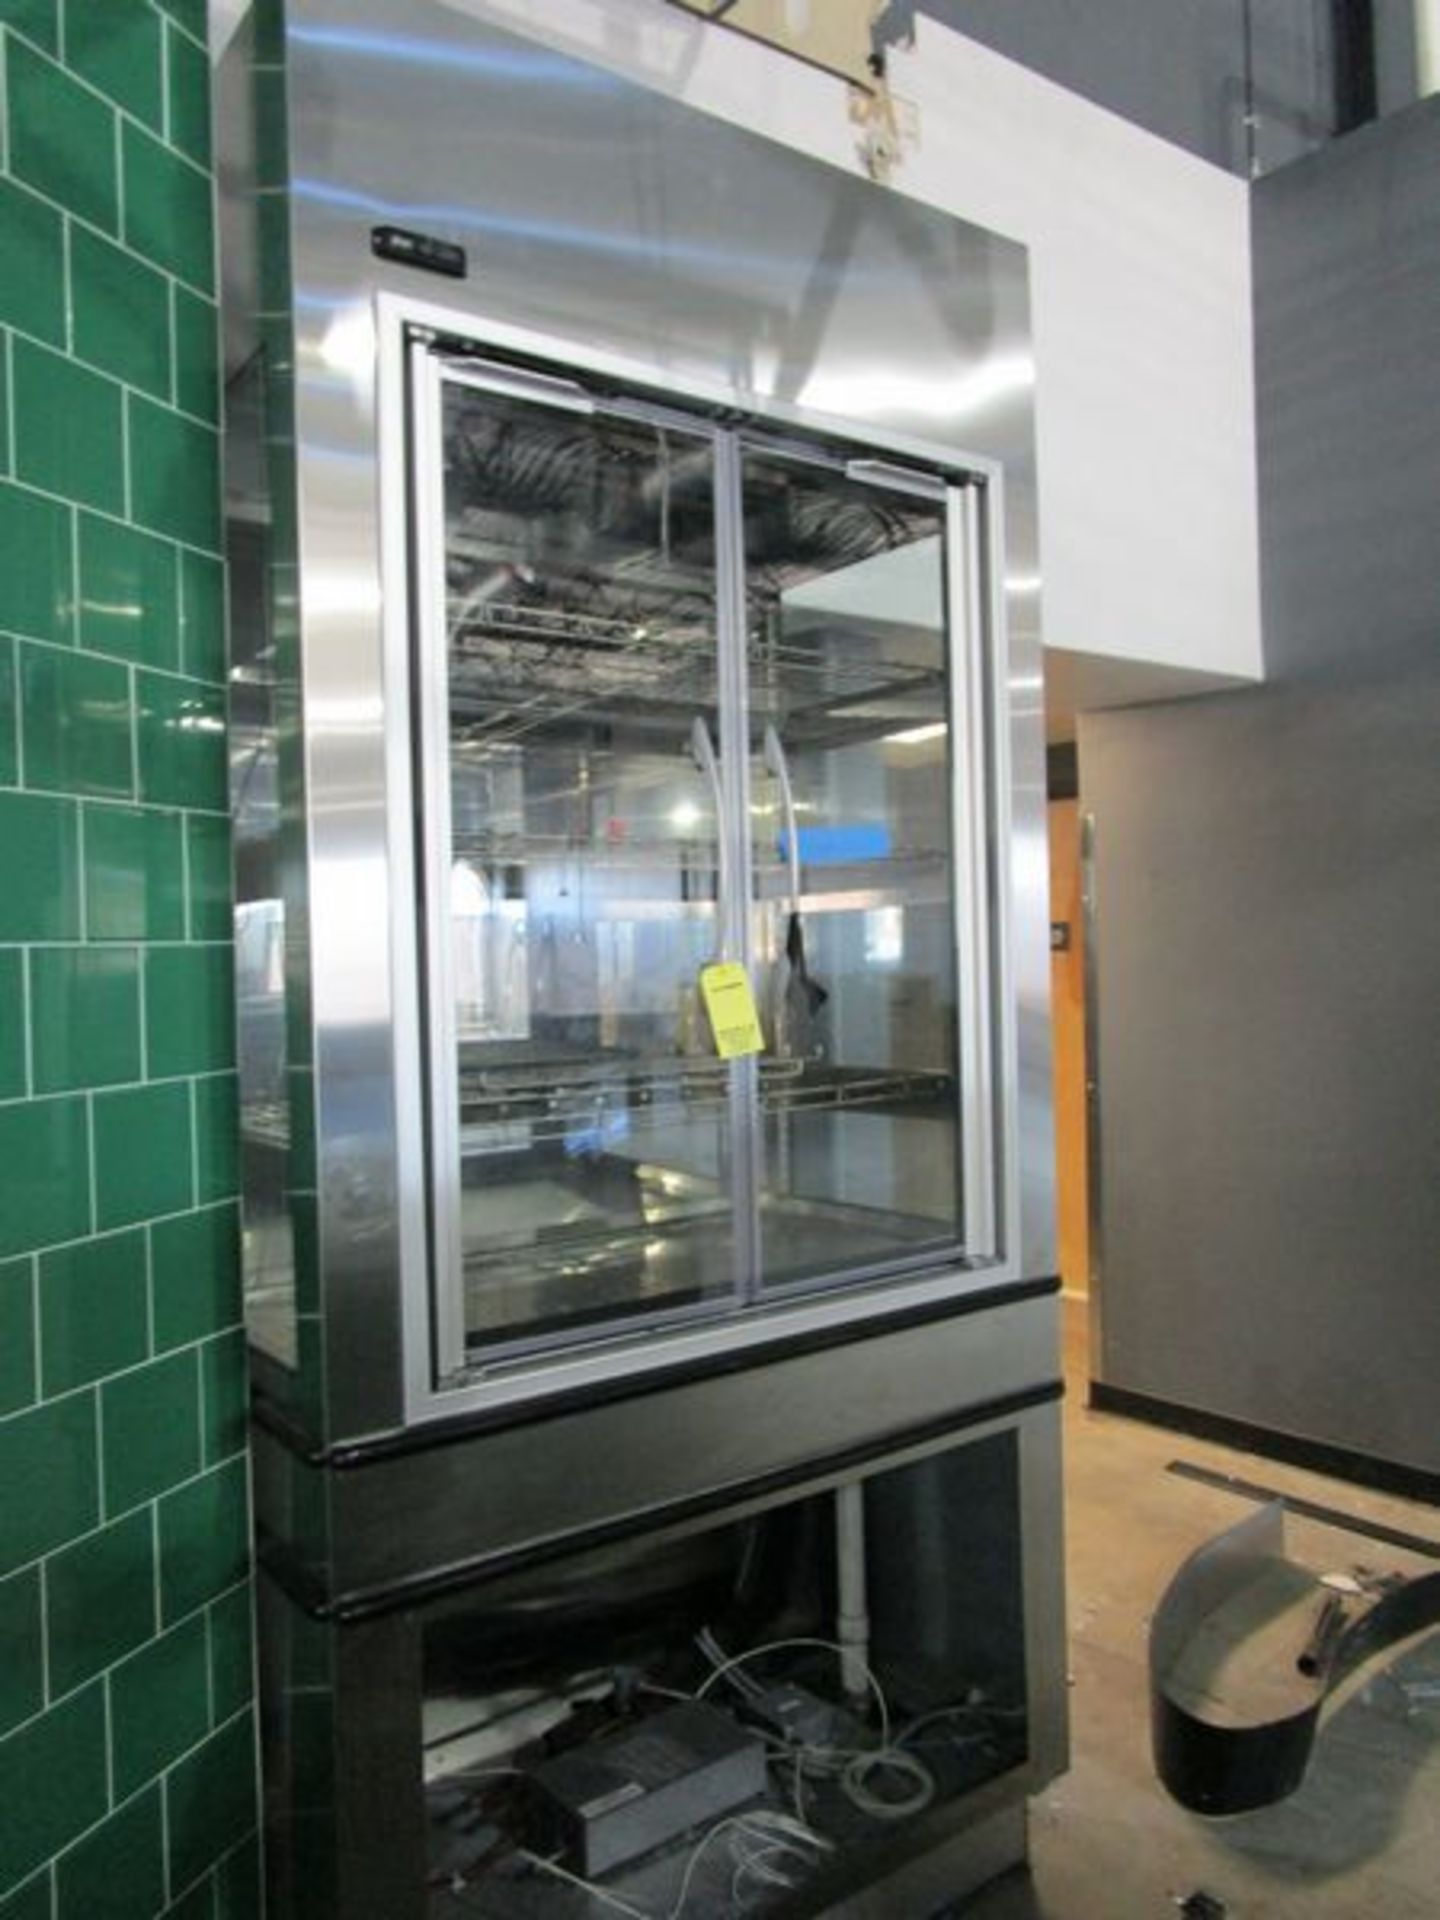 2015 Hill Phoenix AGB4R Beef Aging Cabinet w/ Remote Refrigeration (Asset Located in Fairfield, CT) - Image 2 of 4